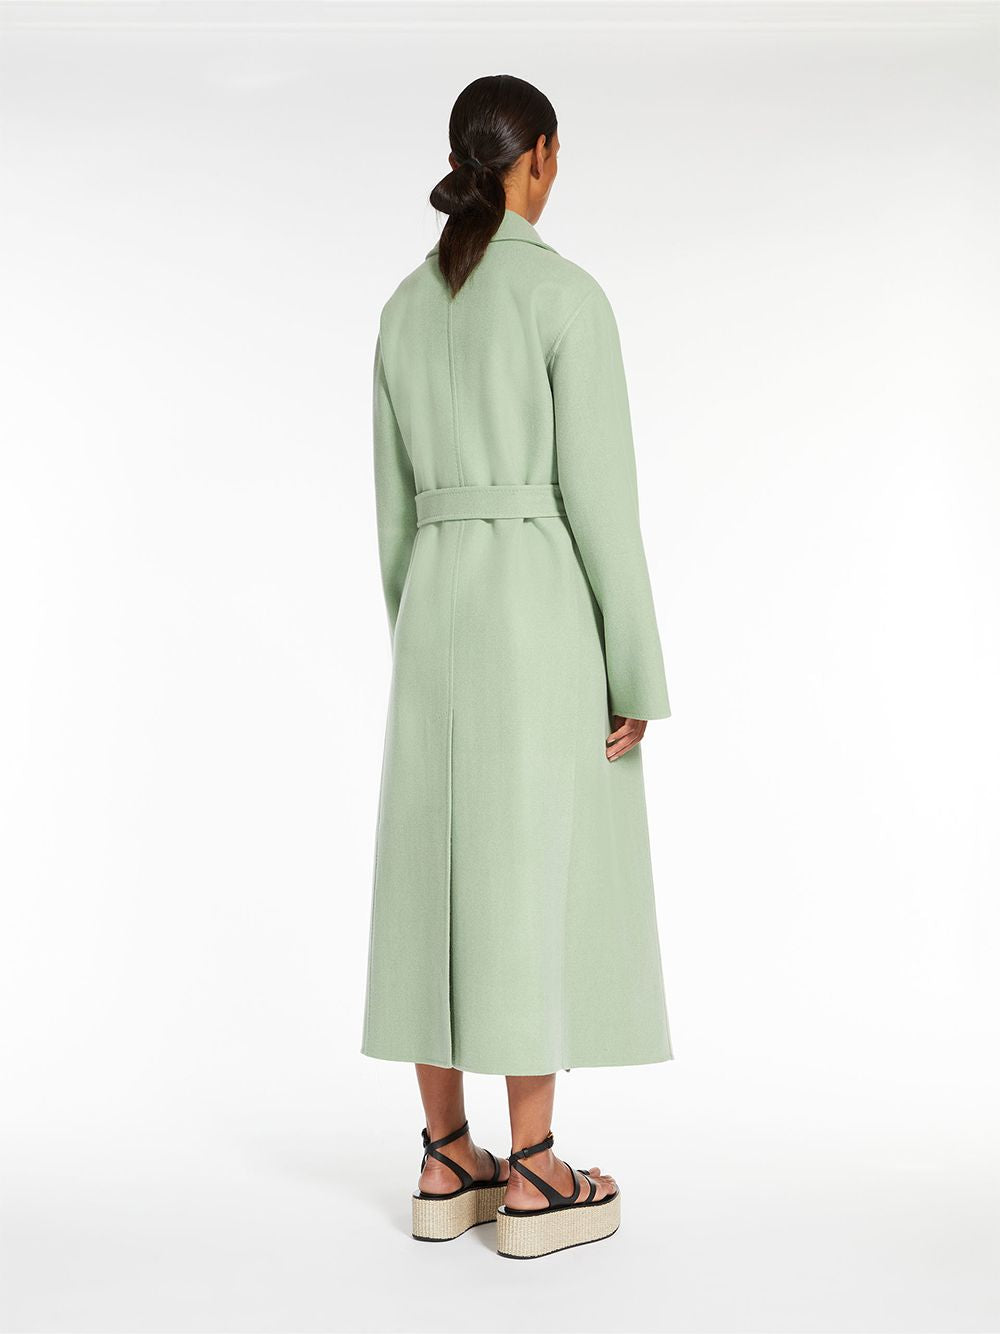 MAX MARA Green Wool and Cashmere Jacket for Women - SS23 Collection